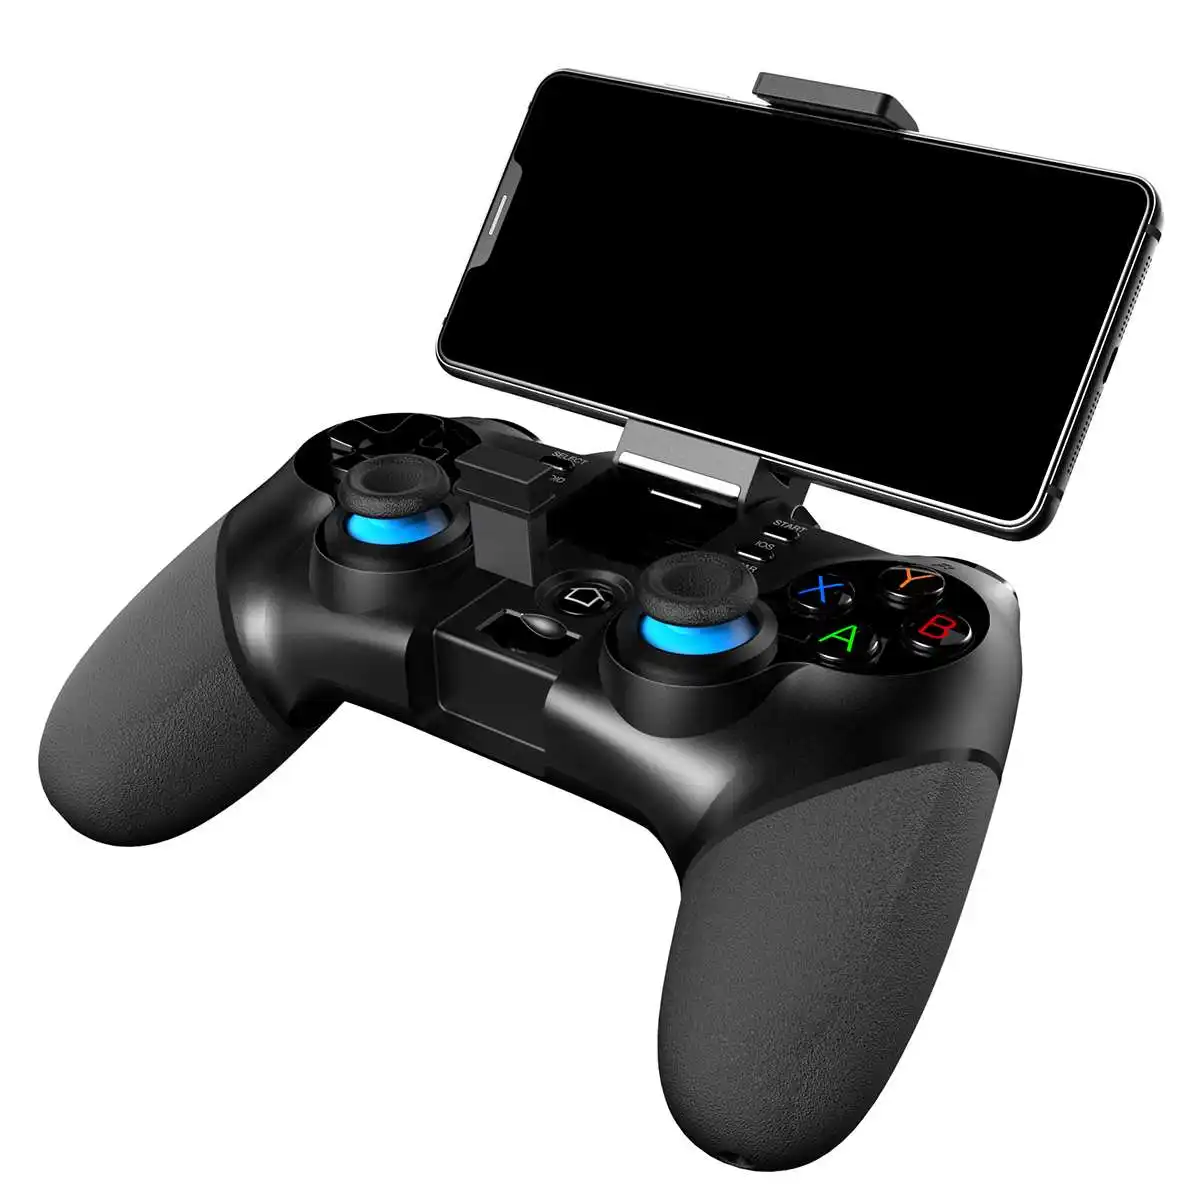 PG-9156 Wireless Bluetooth Turbo Gamepad Controller for PUBG Mobile Game for iOS/ Android/ PC Mobile Games Gamepad